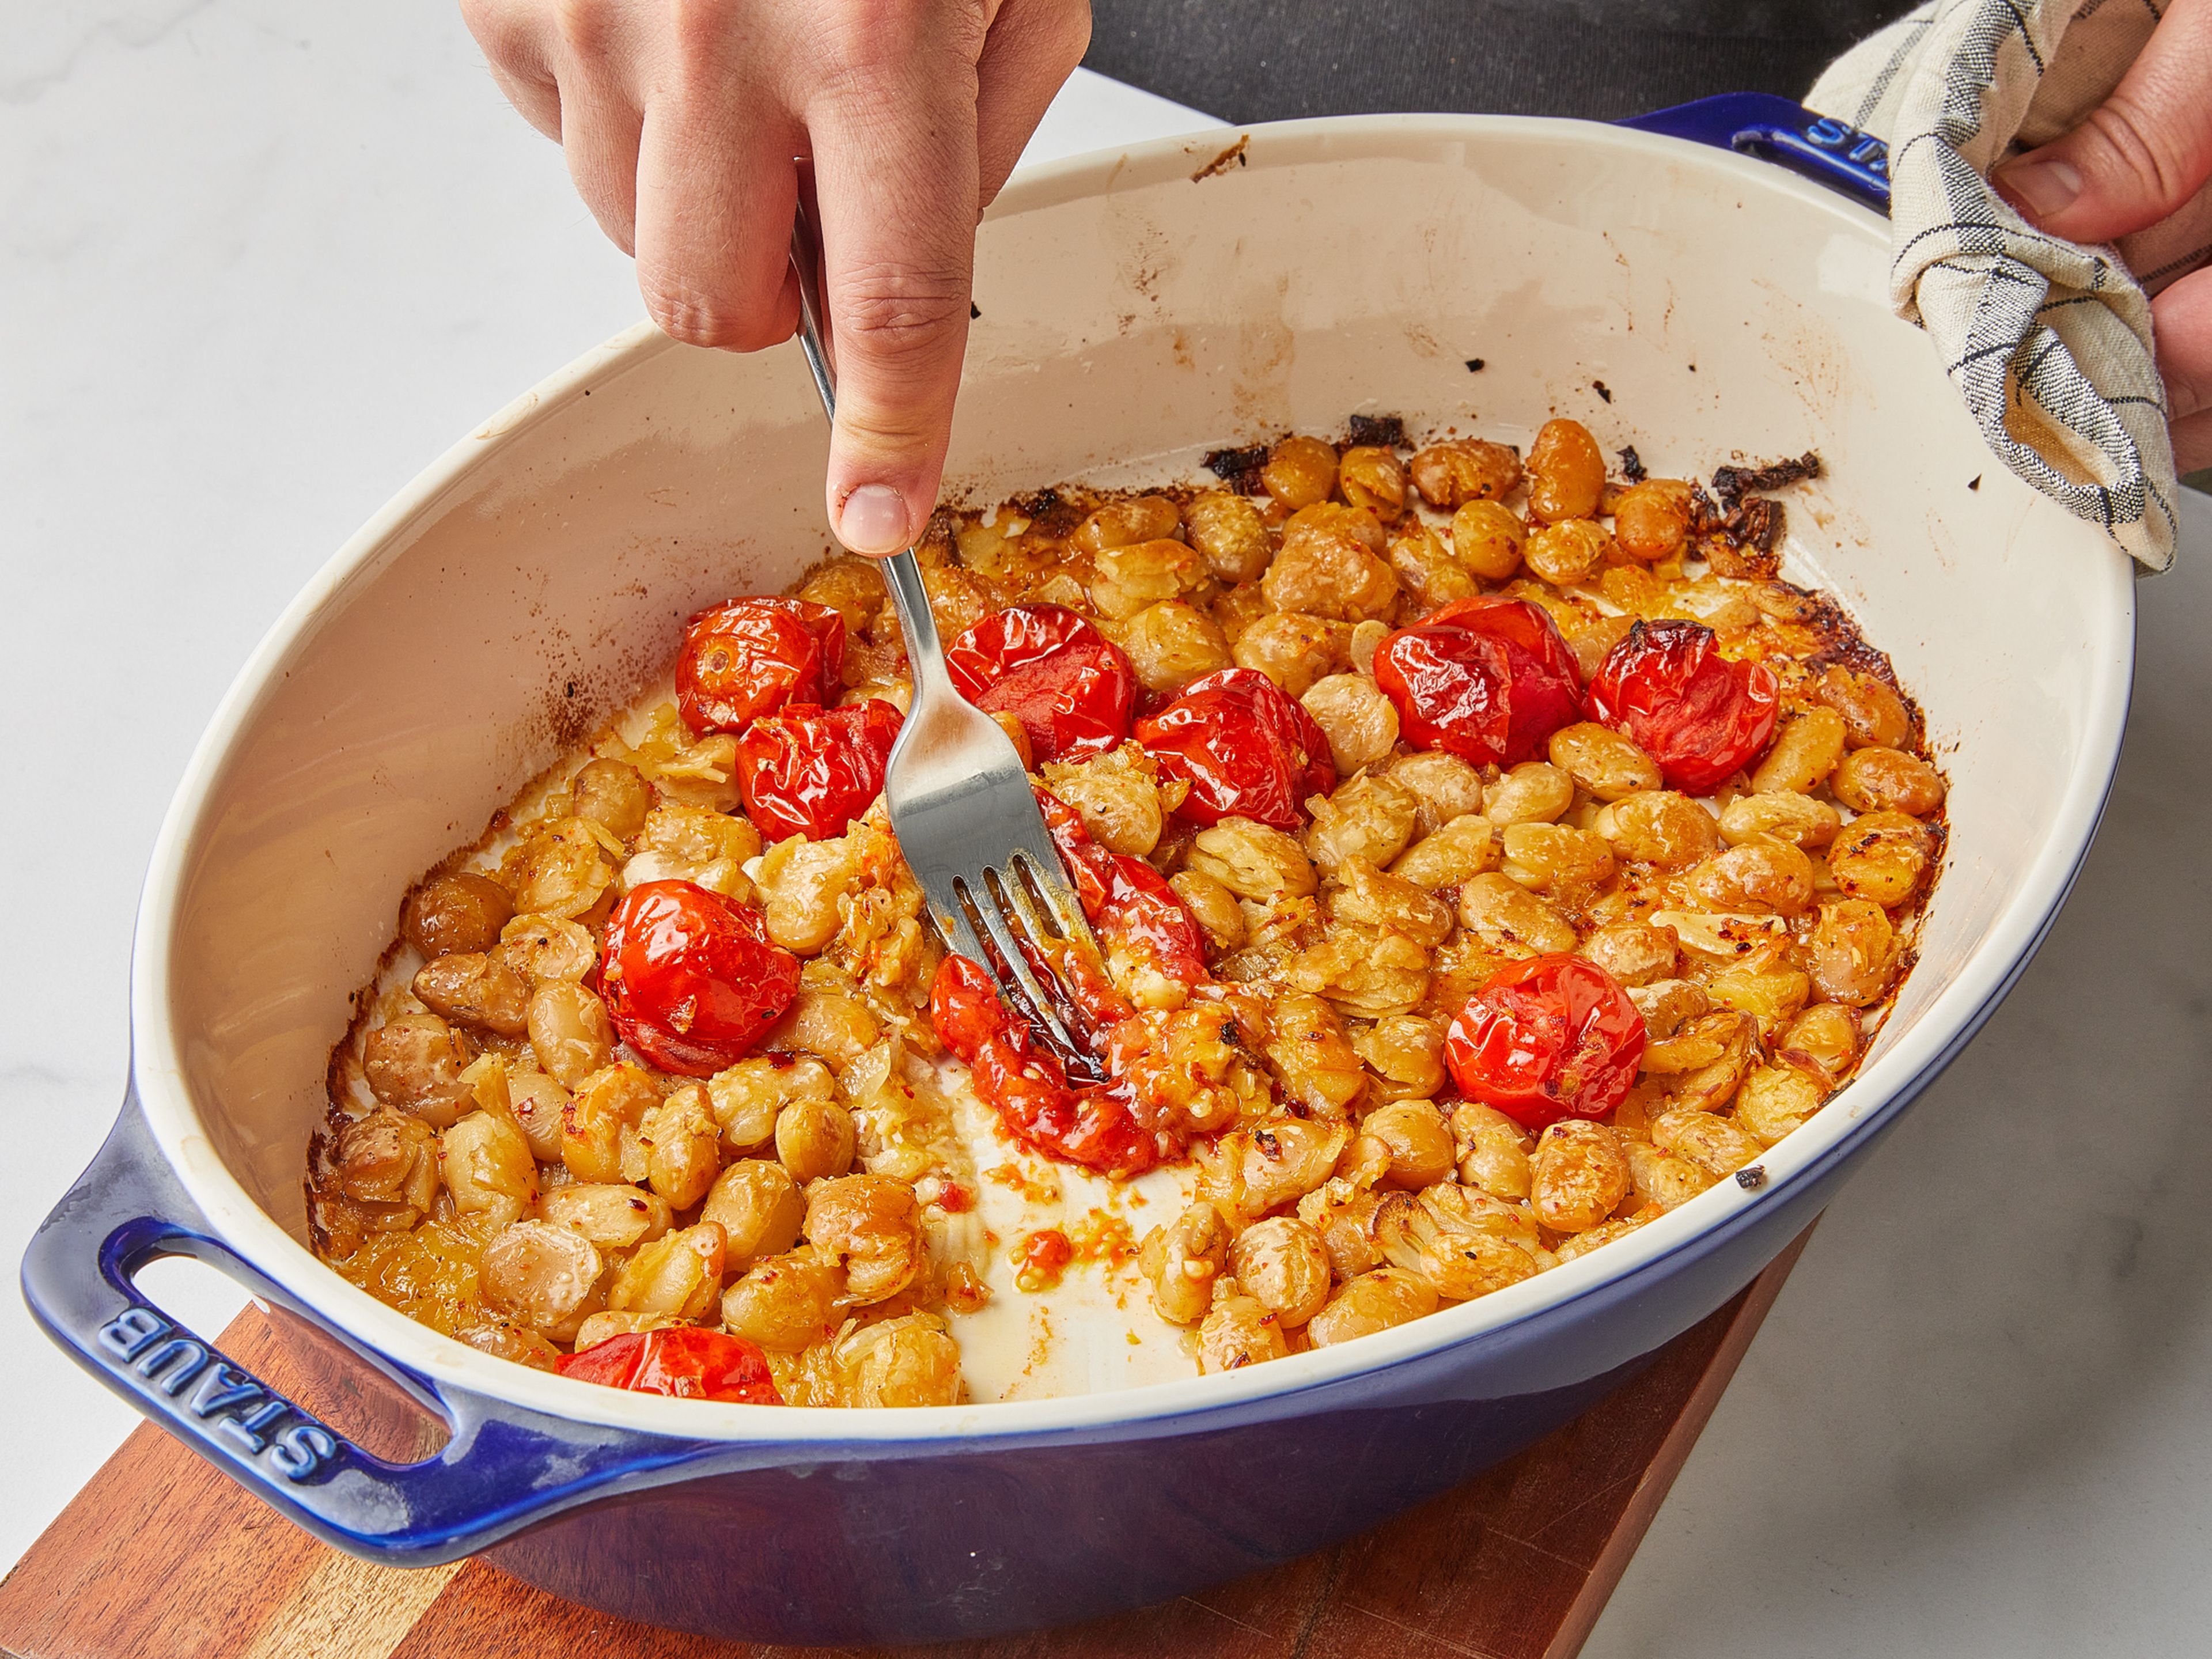 Remove the baking dish from the oven. Mash tomatoes with a fork, then mix with the beans and mash them a little as well. Let stand for approx. 10 min. so that the liquid thickens. Season to taste with apple cider vinegar, more salt and pepper if needed. Serve with toasted bread, basil and more olive oil. Enjoy!